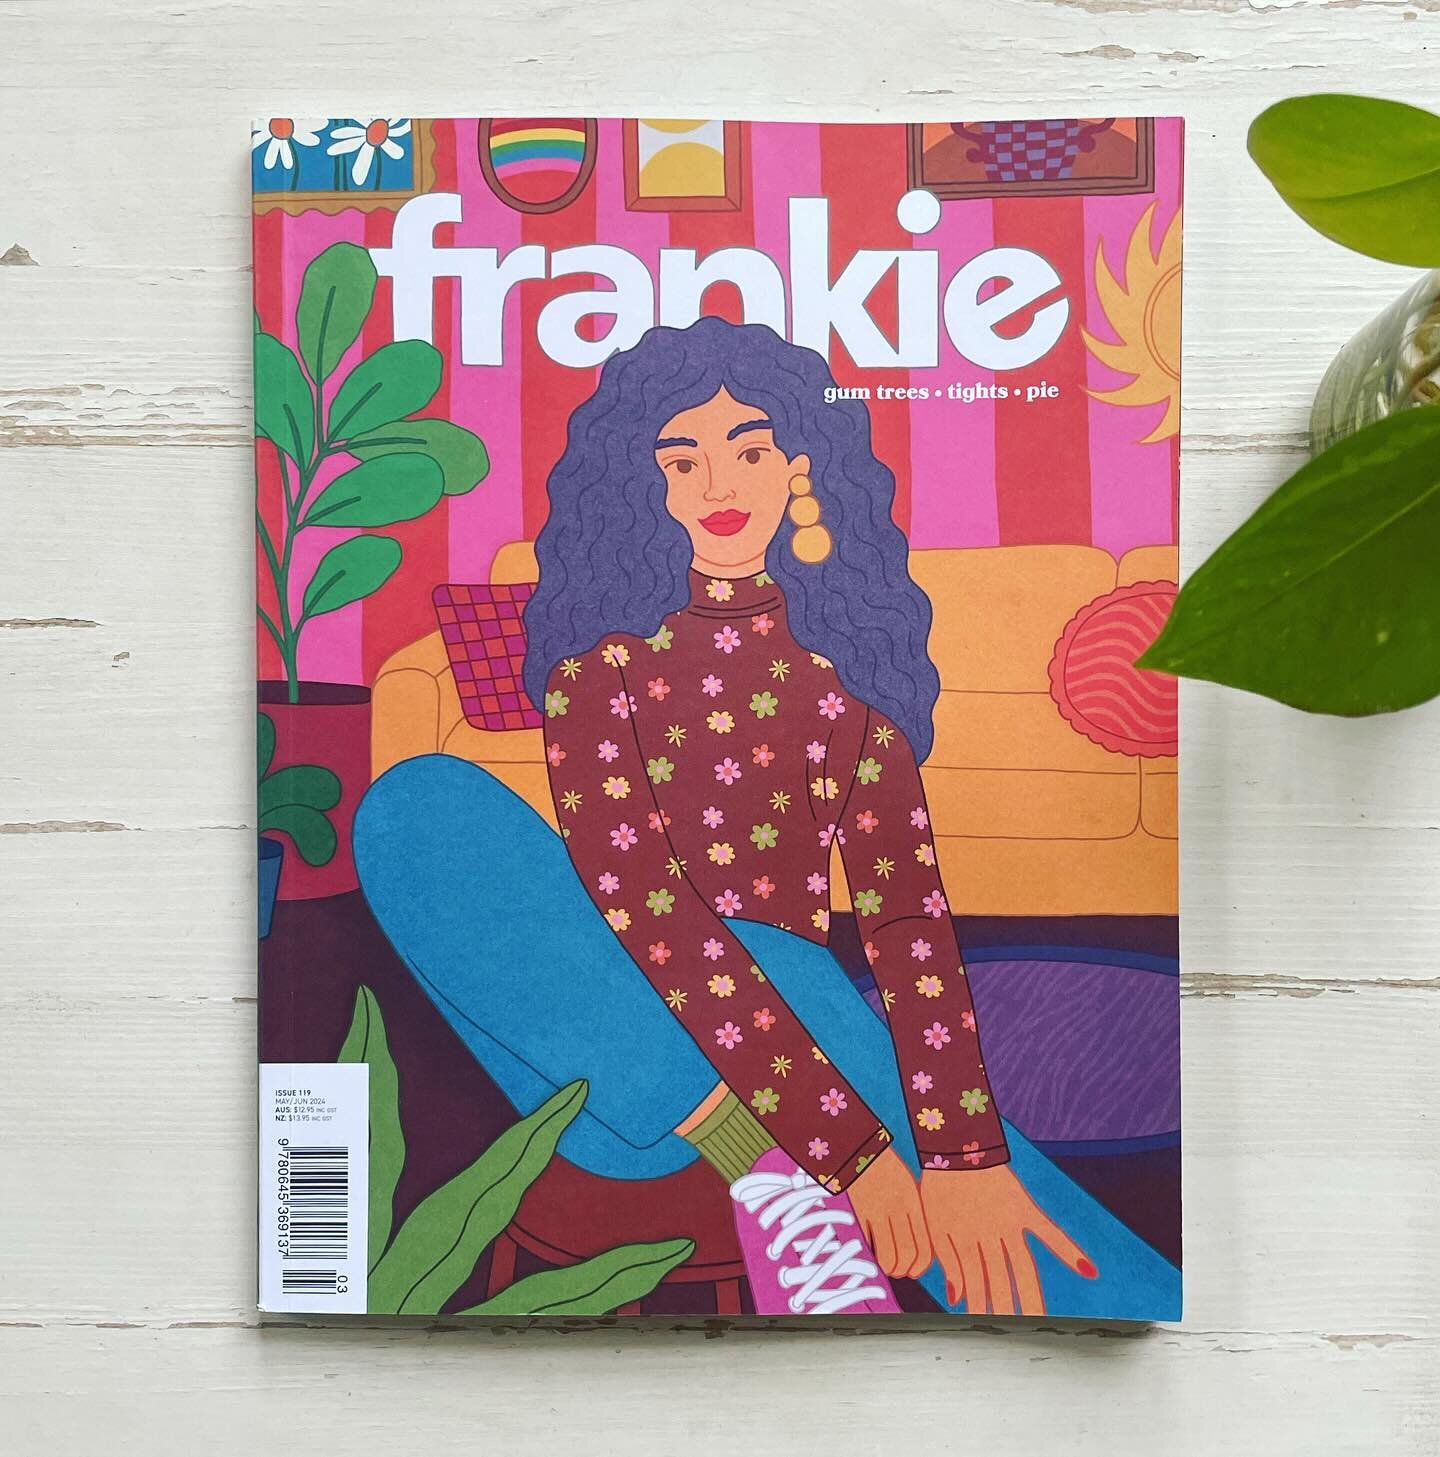 Was such a happy surprise to discover the characters in the new issue of @frankiemagazine ! Couldn&rsquo;t quite believe that they were staring back at me as I was flipping through the pages. 
Very special and also slightly unreal to see them in a ma